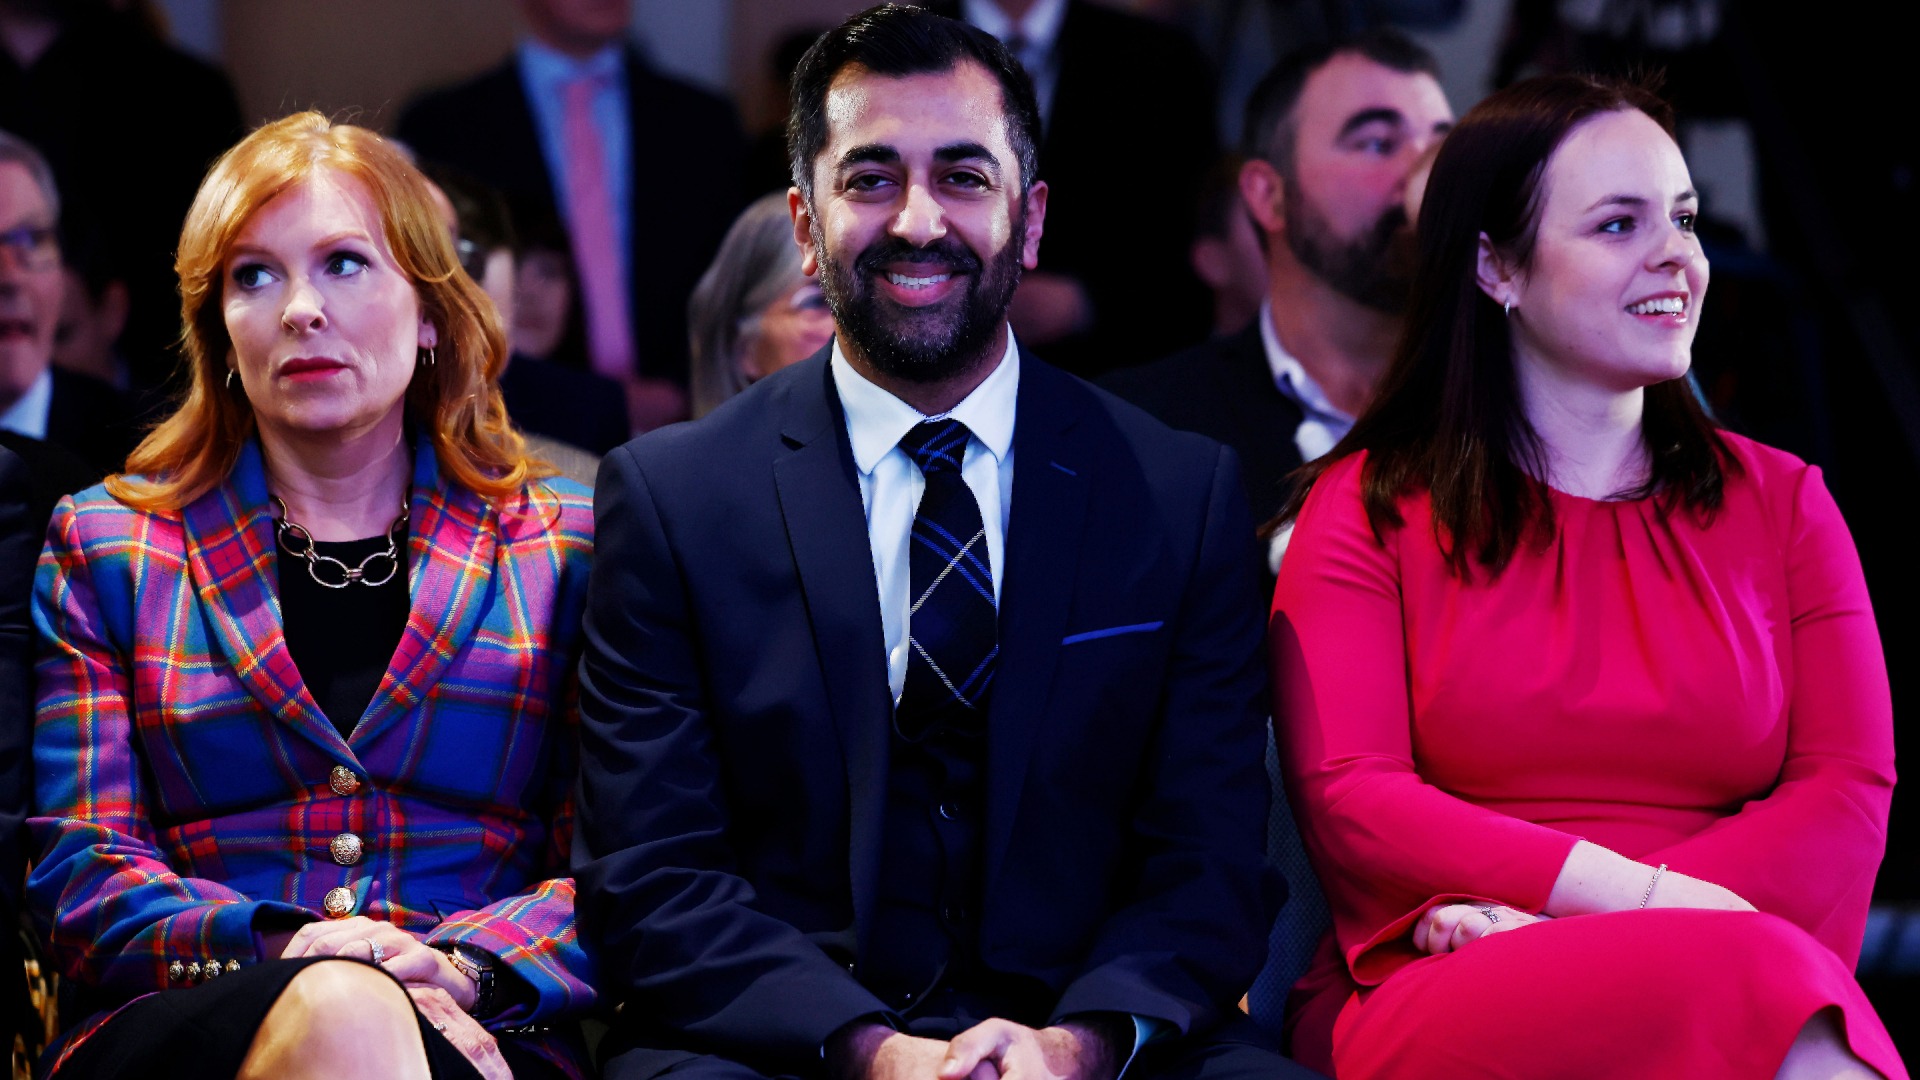 From left: Ash Regan, Humza Yousaf and Kate Forbes react as the SNP votes for its new party leader at Murrayfield on March 27.